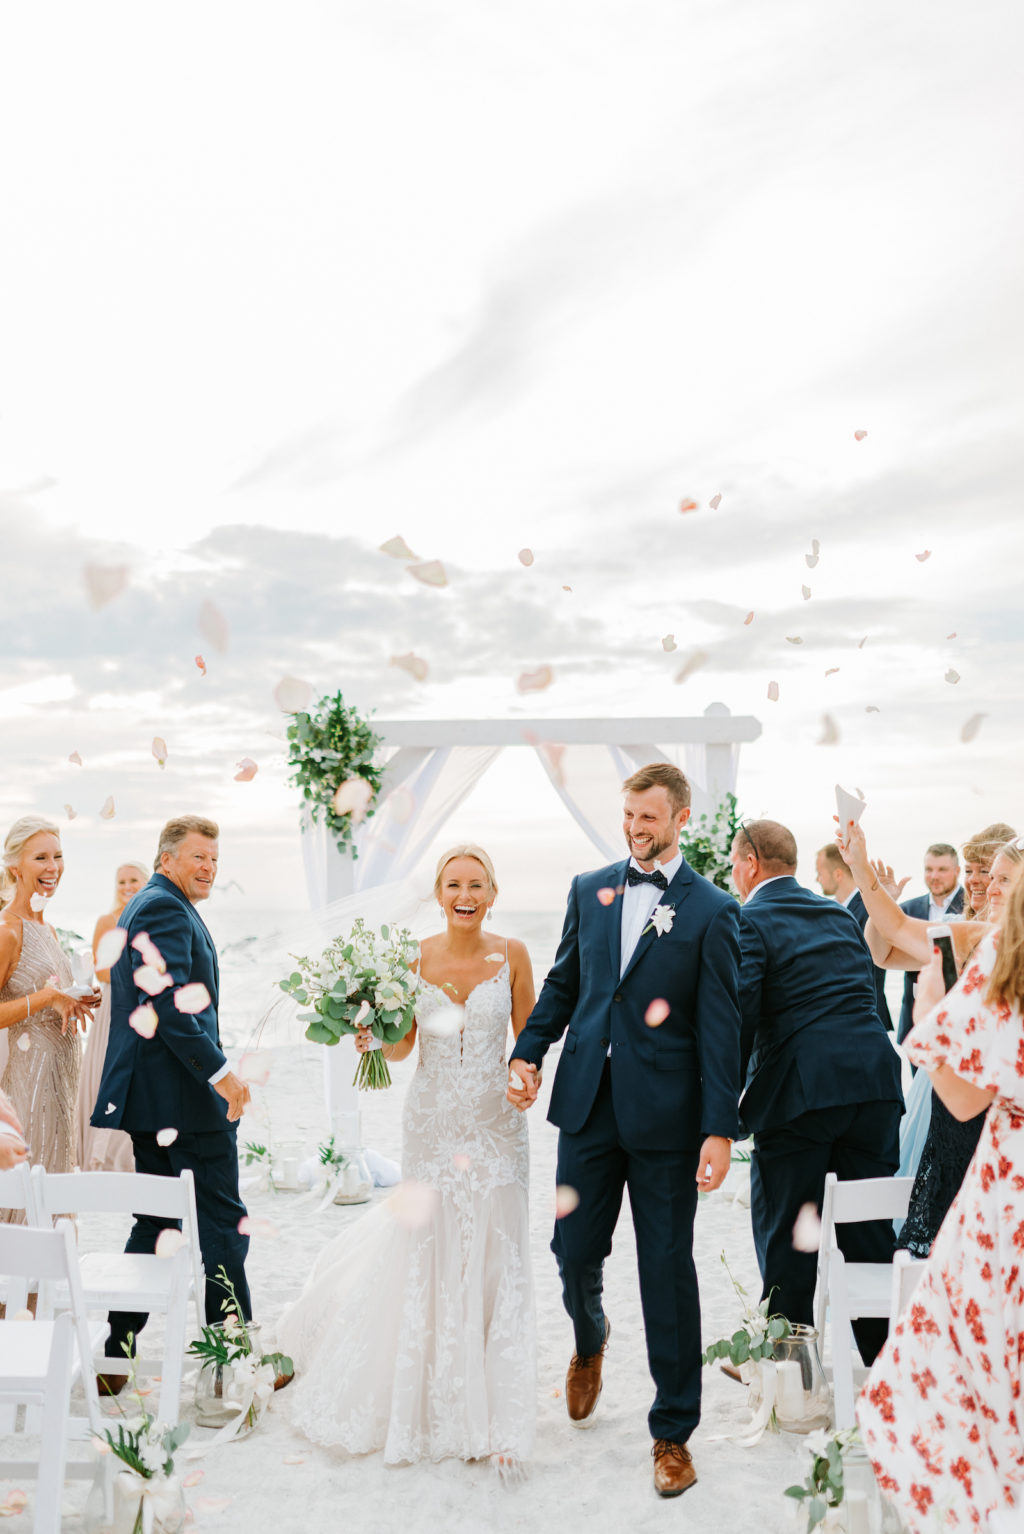 Florida Bride and Groom Exiting Wedding Ceremony on Beach, Guests Throwing Flower Petals | Tampa Wedding Venue The Resort at Longboat Key Club